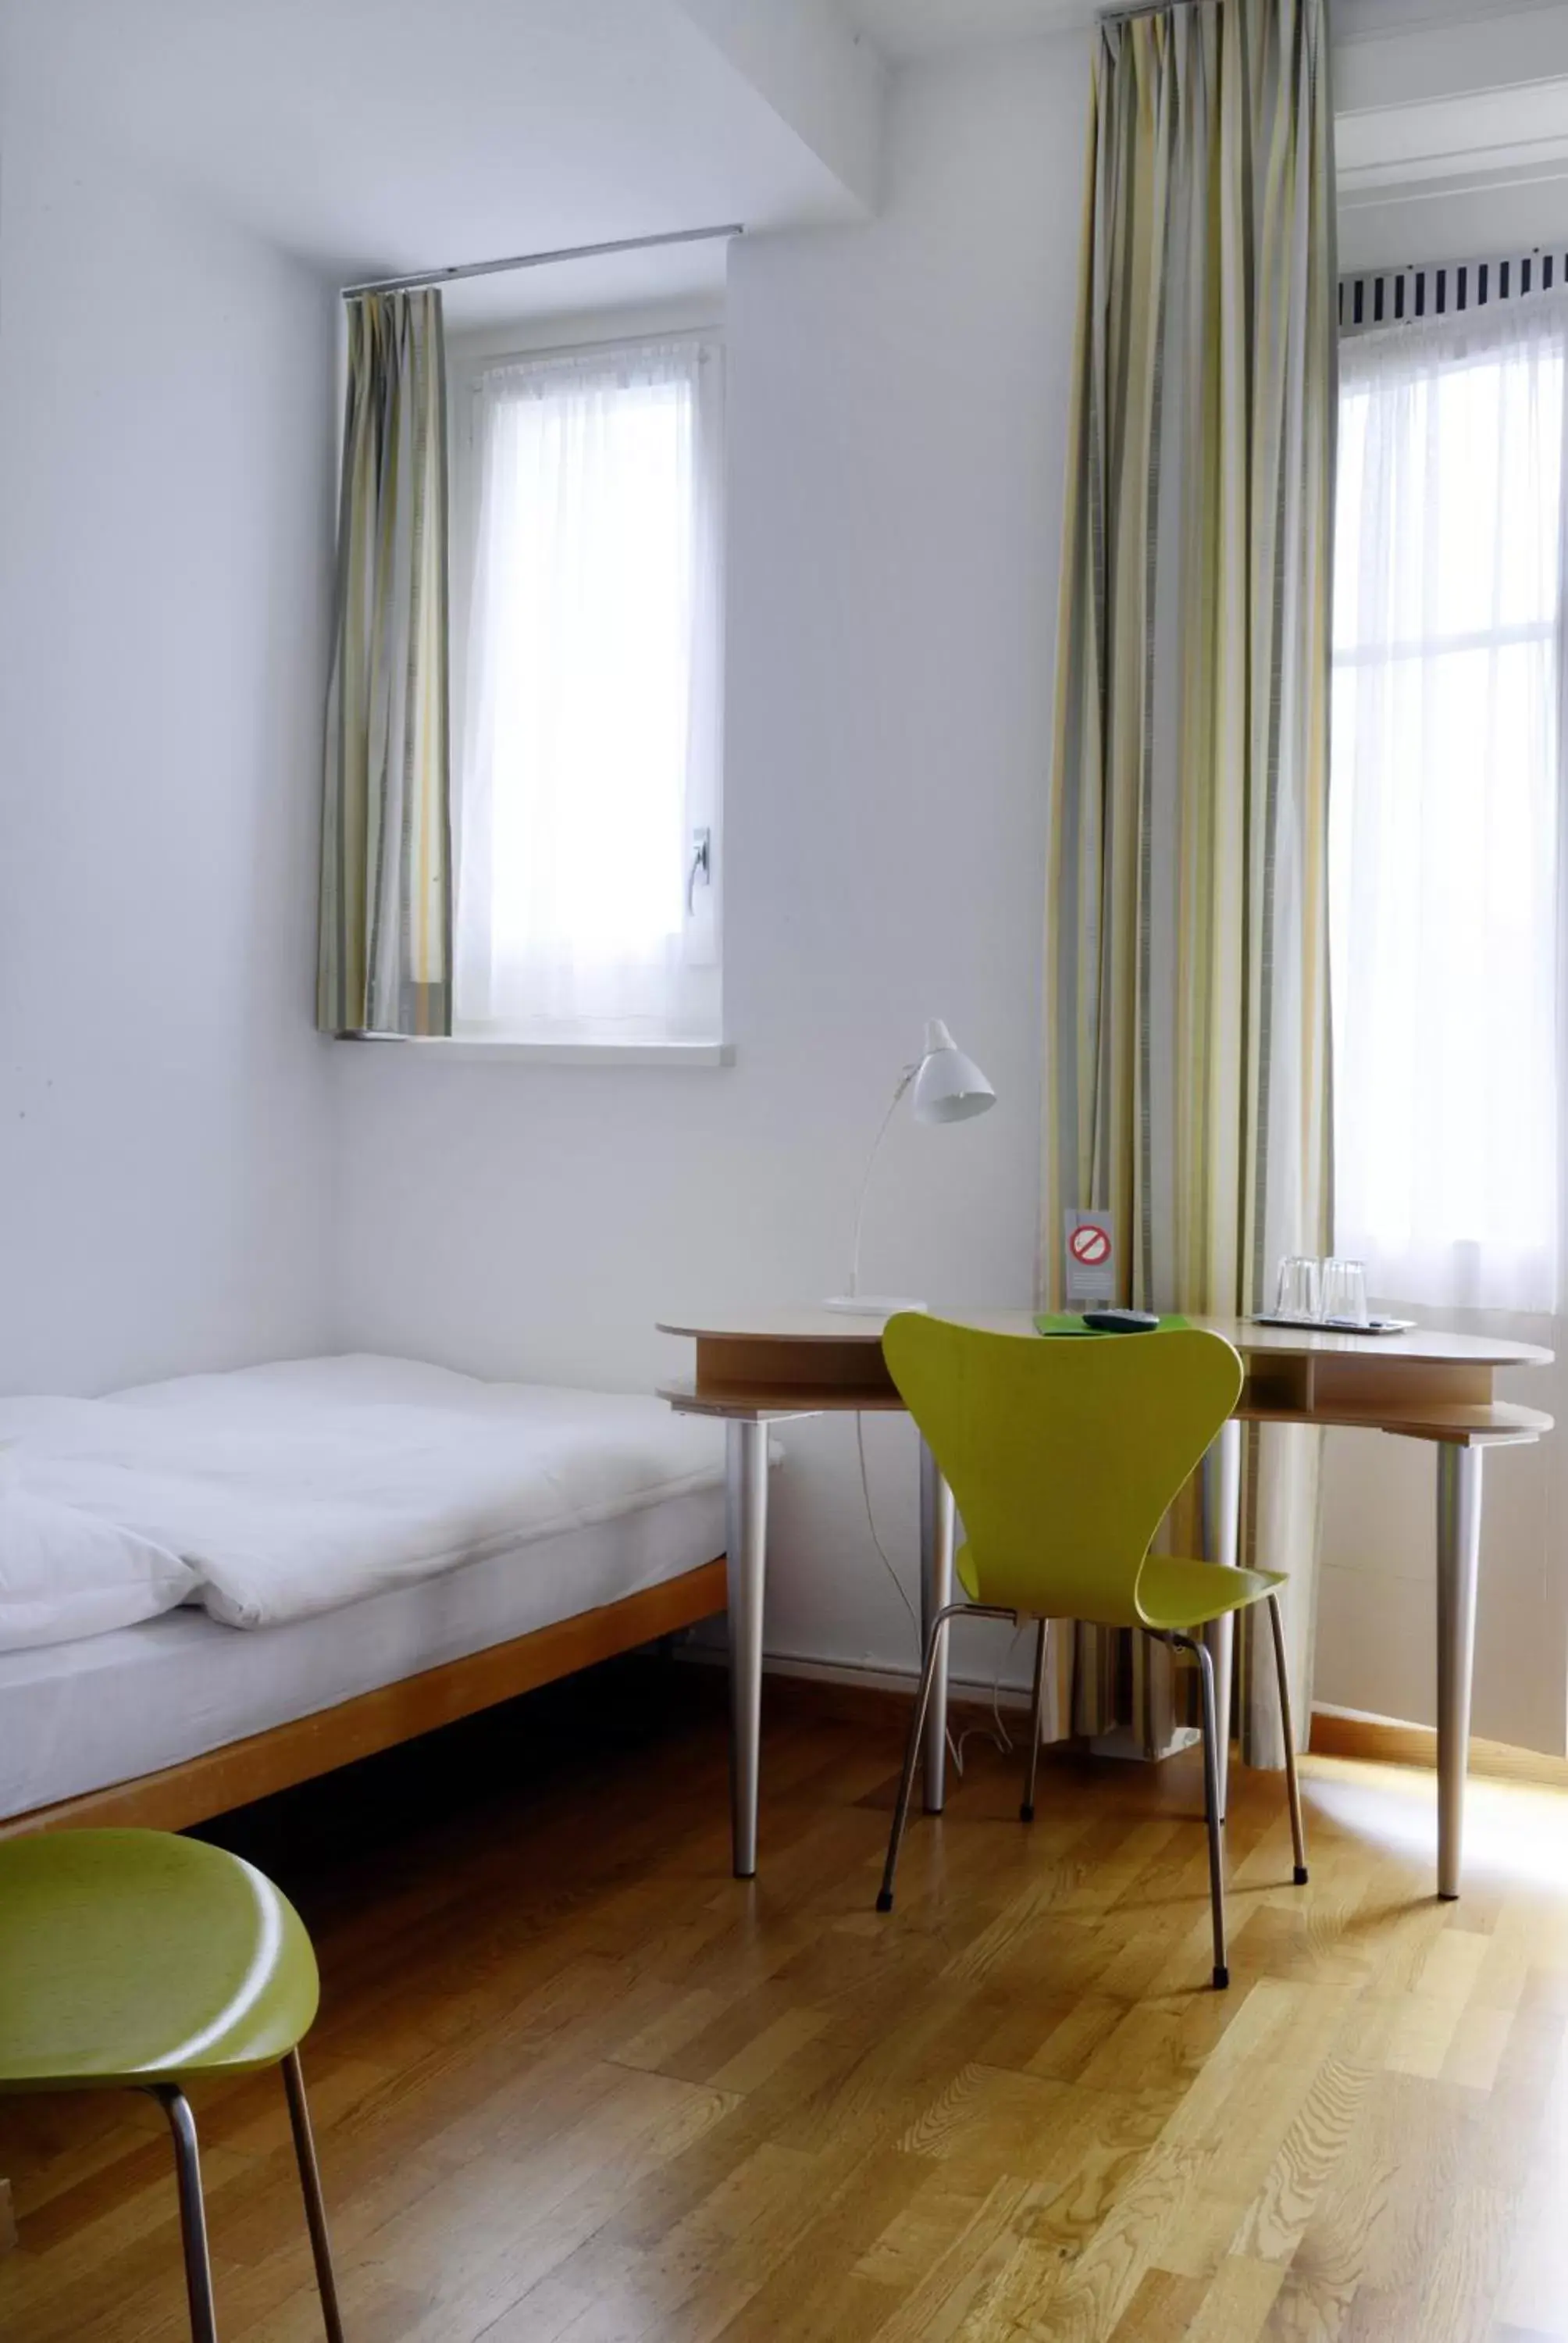 Standard Single Room with Shared Bathroom in Hotel Marthahaus